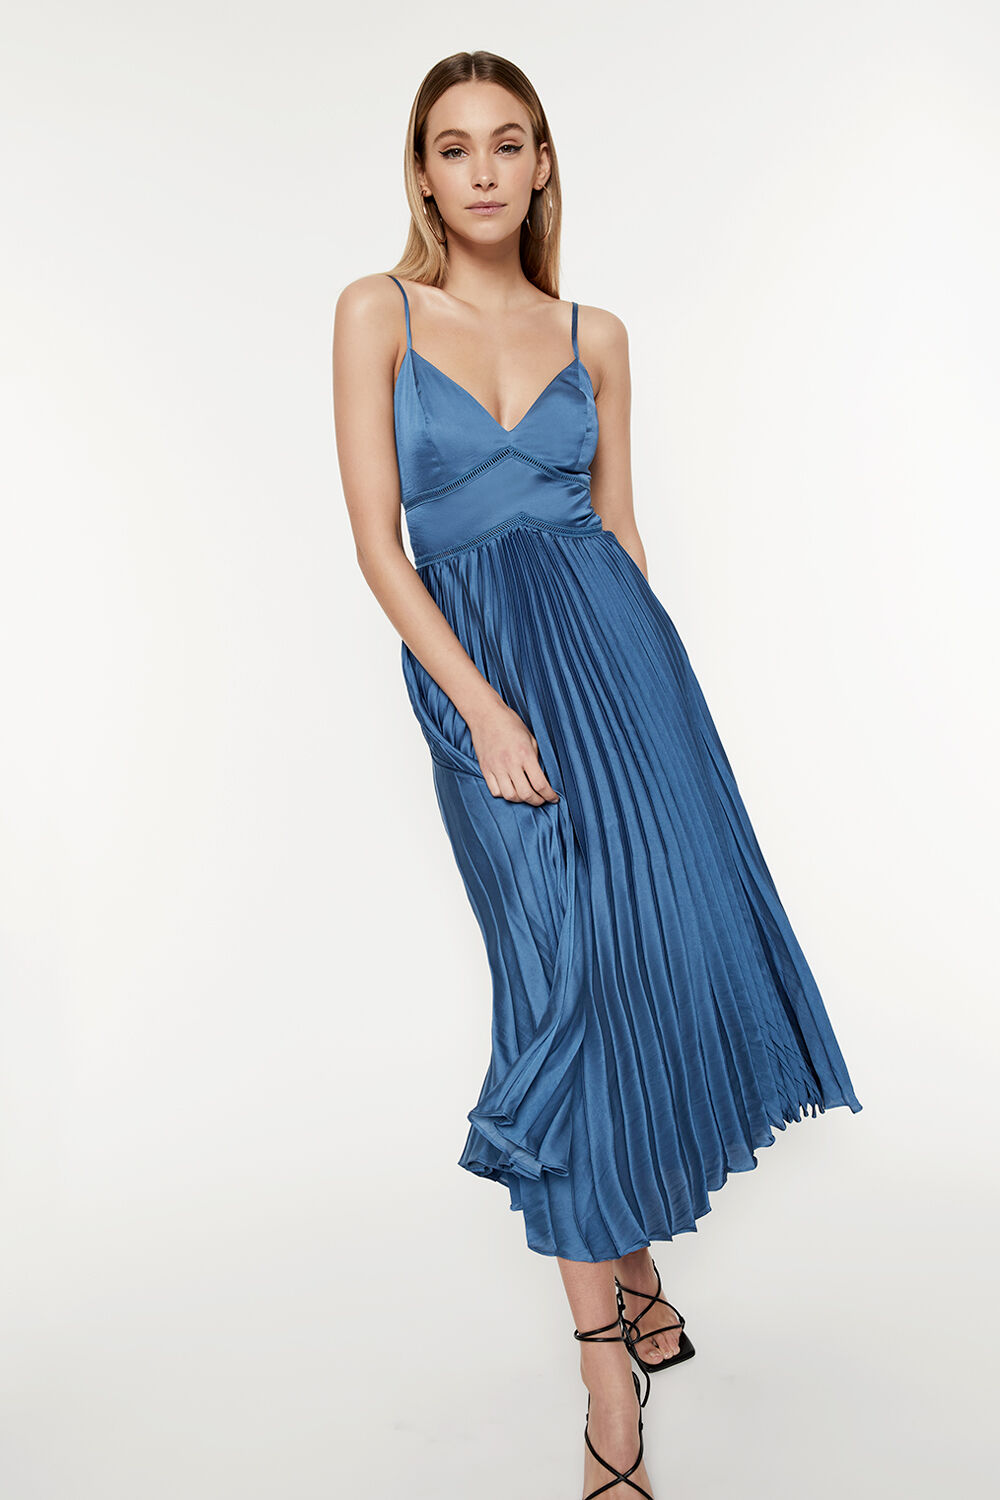 Mary Pleated Dress in Teal | Bardot